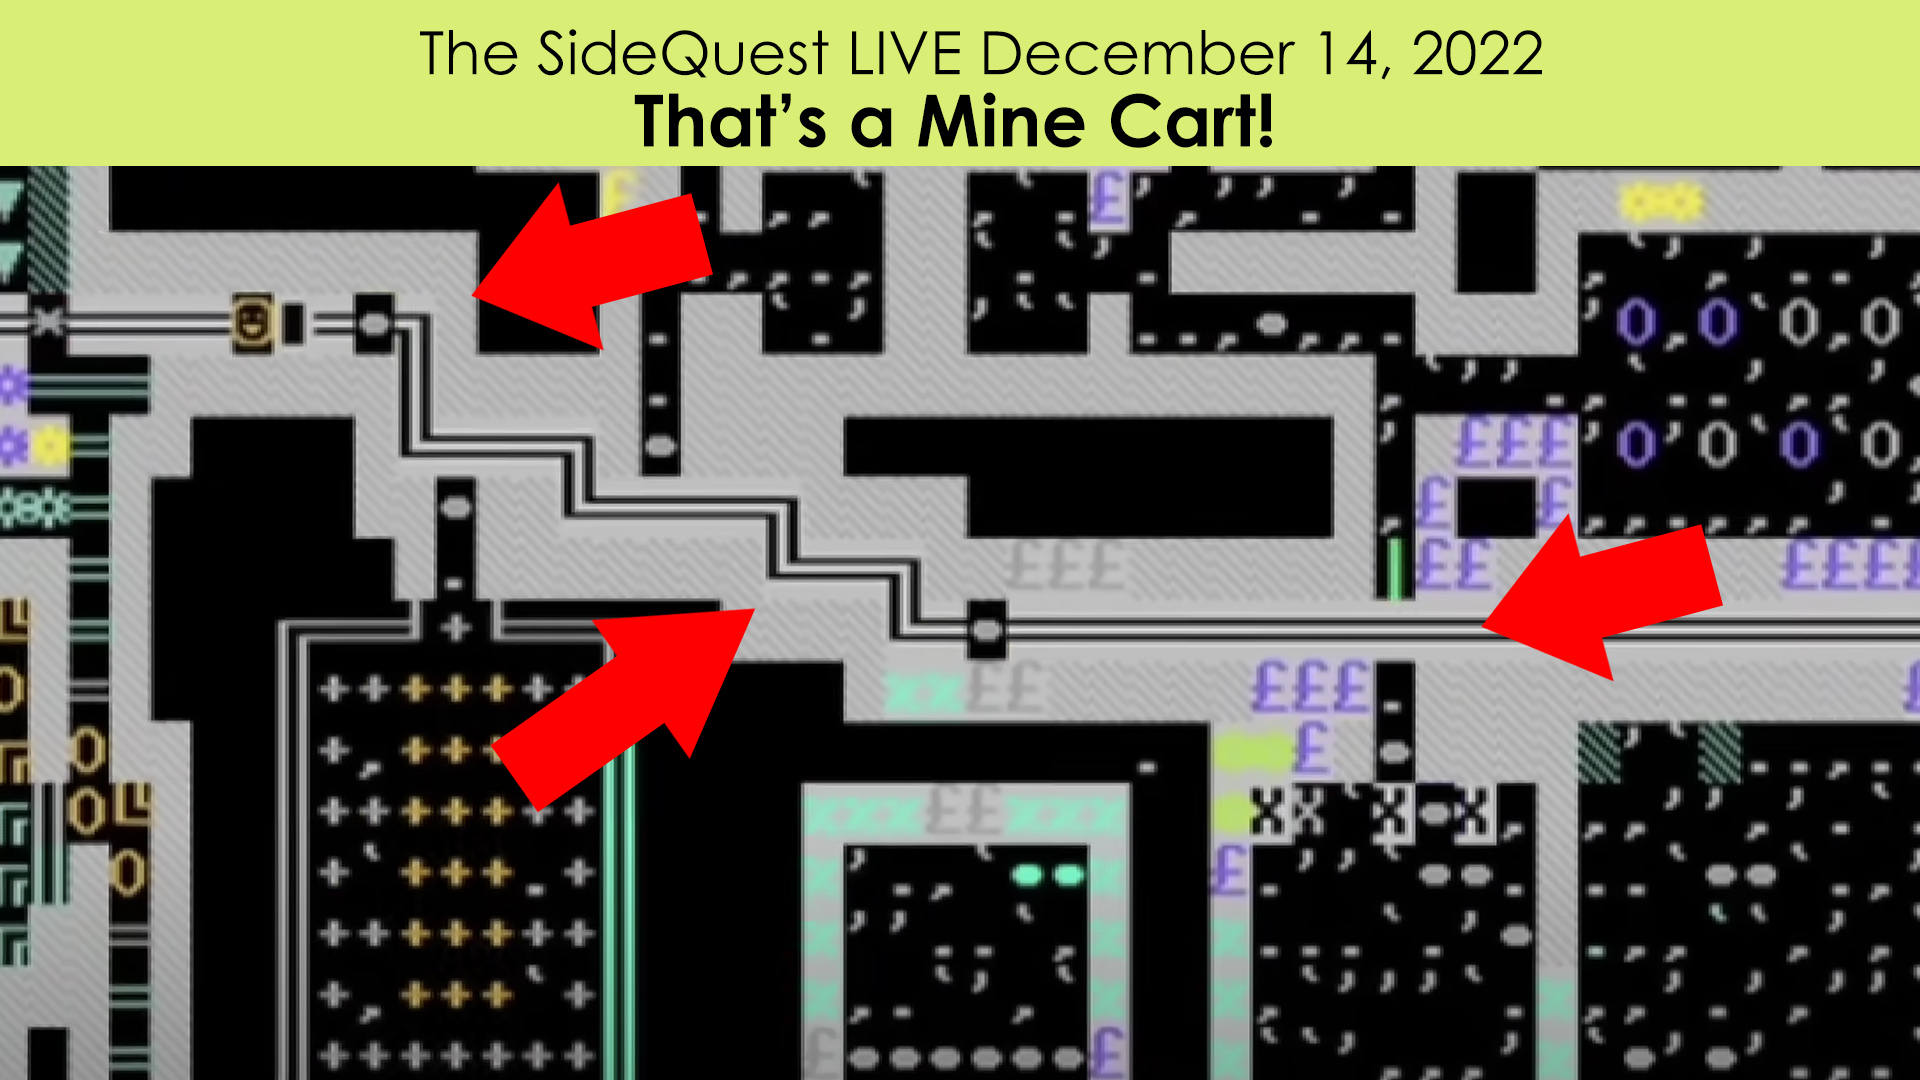 The SideQuest LIVE December 14, 2022: That’s a Mine Cart!